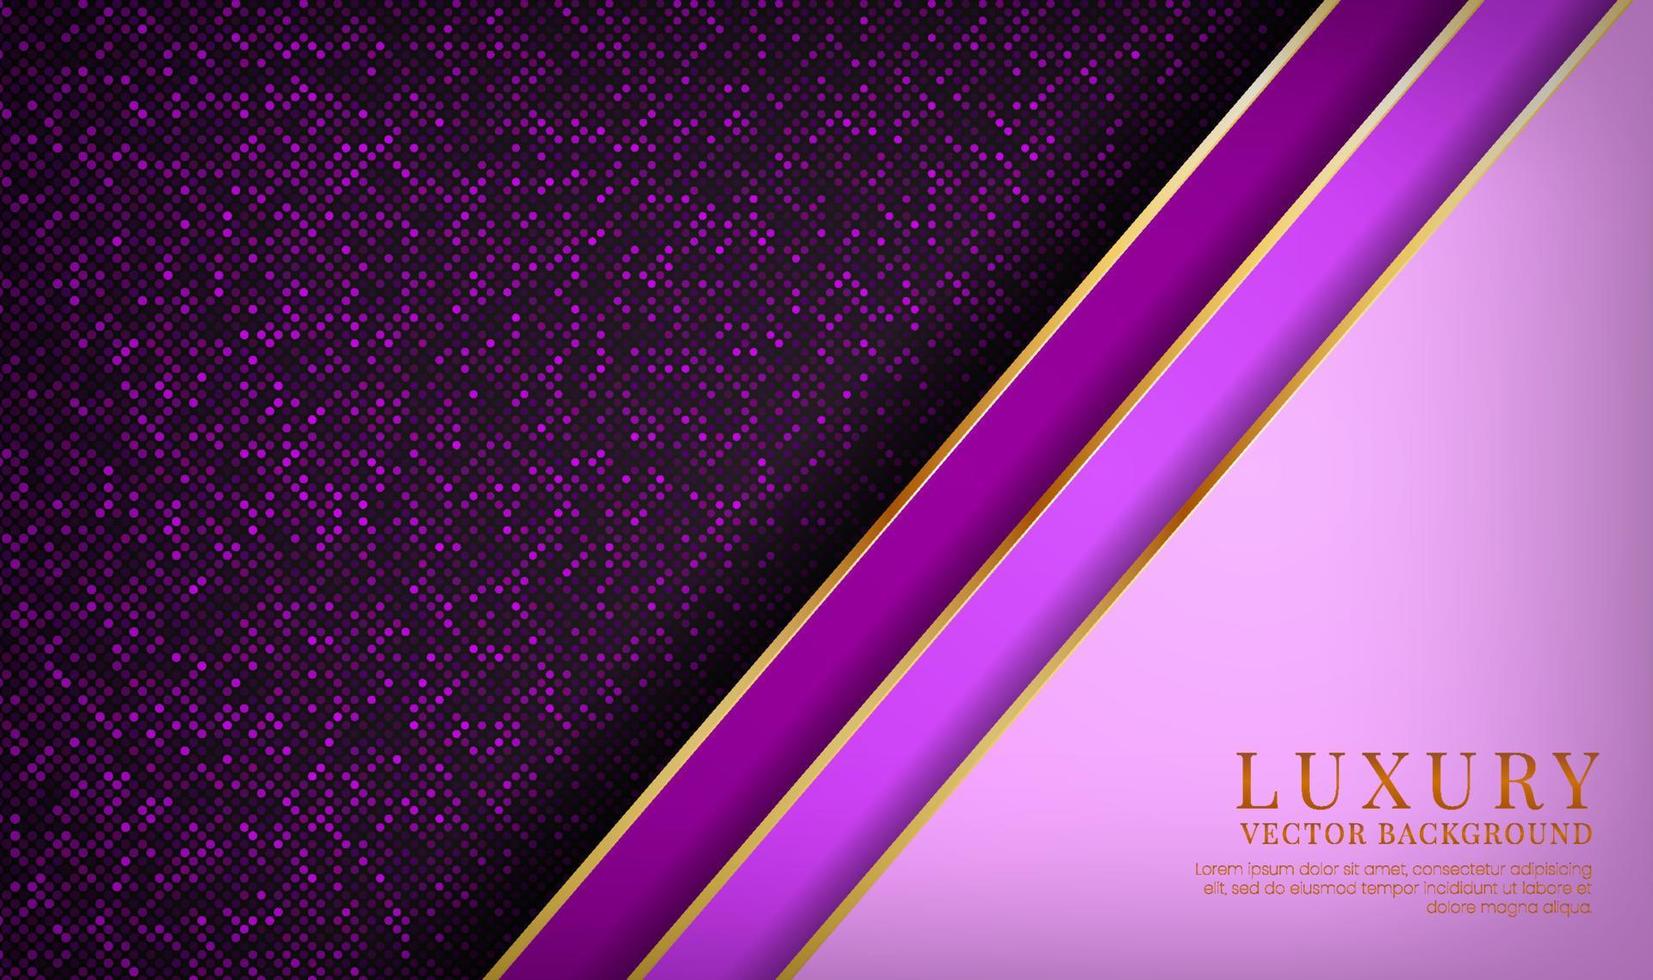 3D purple luxury abstract background overlap layers on dark space with golden stripes effect decoration. Graphic design element future style concept for flyer, card, brochure cover, or landing page vector